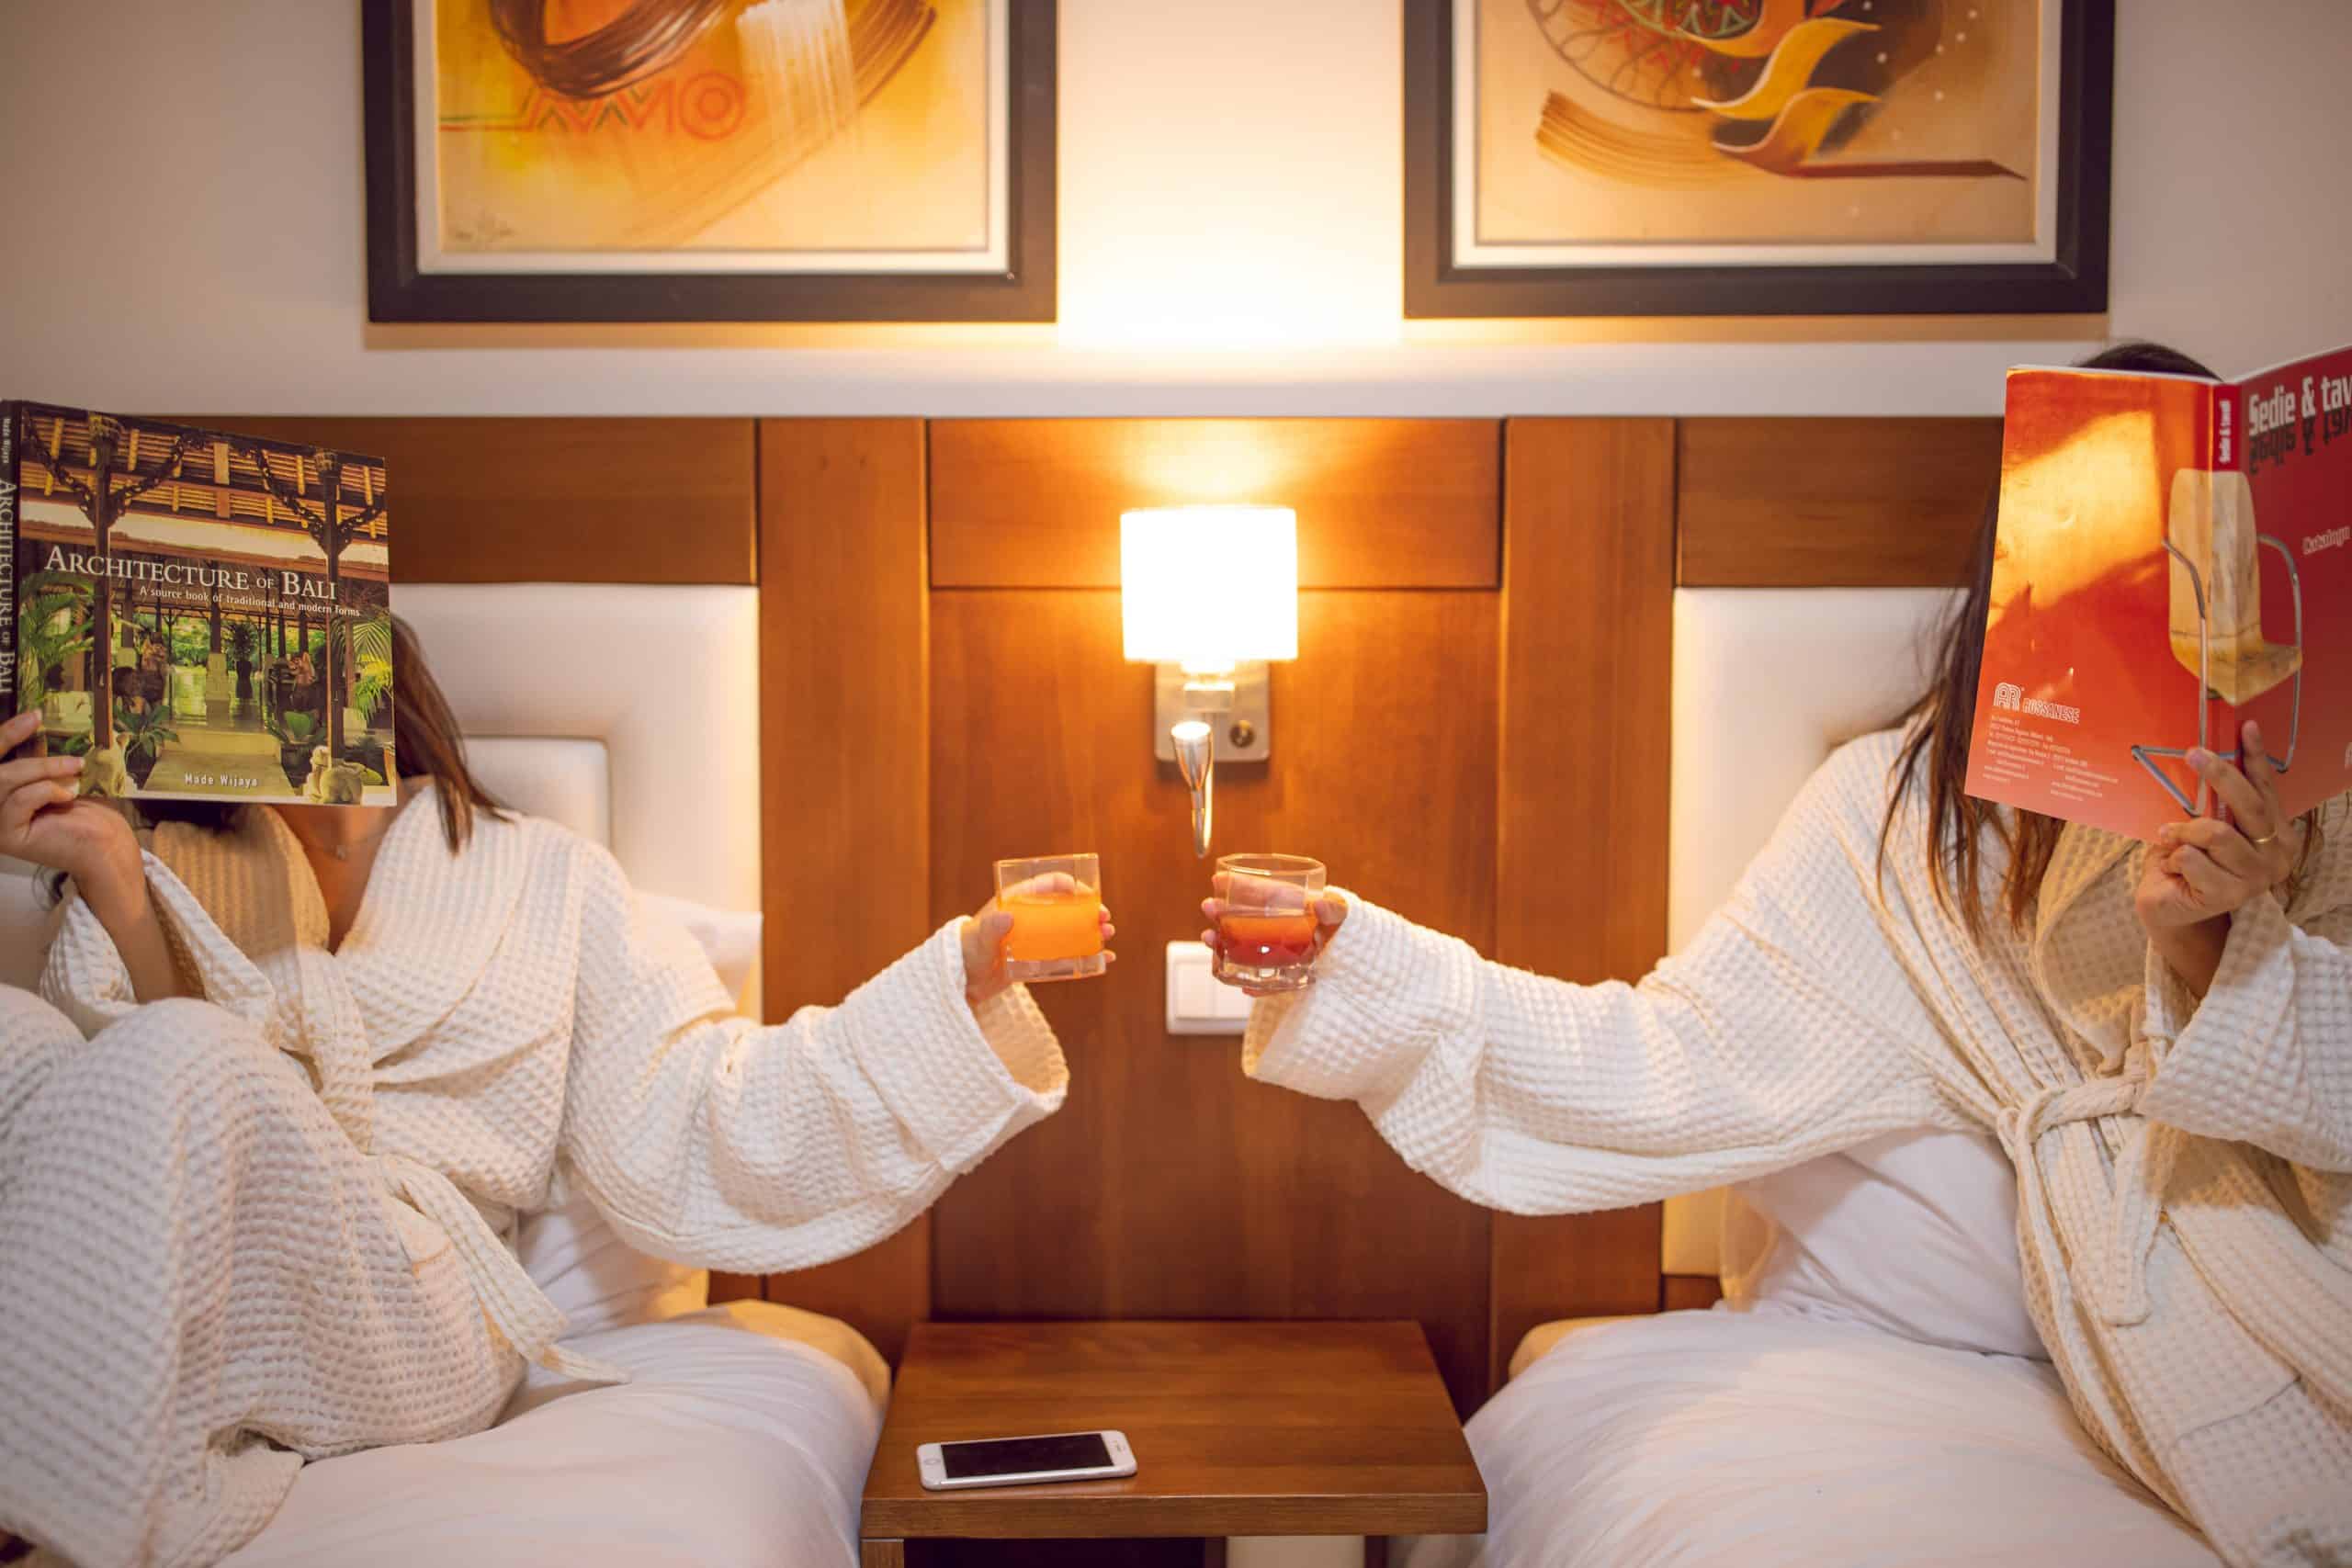 two friends sit on a twin bed each and make a toast while reading a magazine. That magazine is covering their faces.